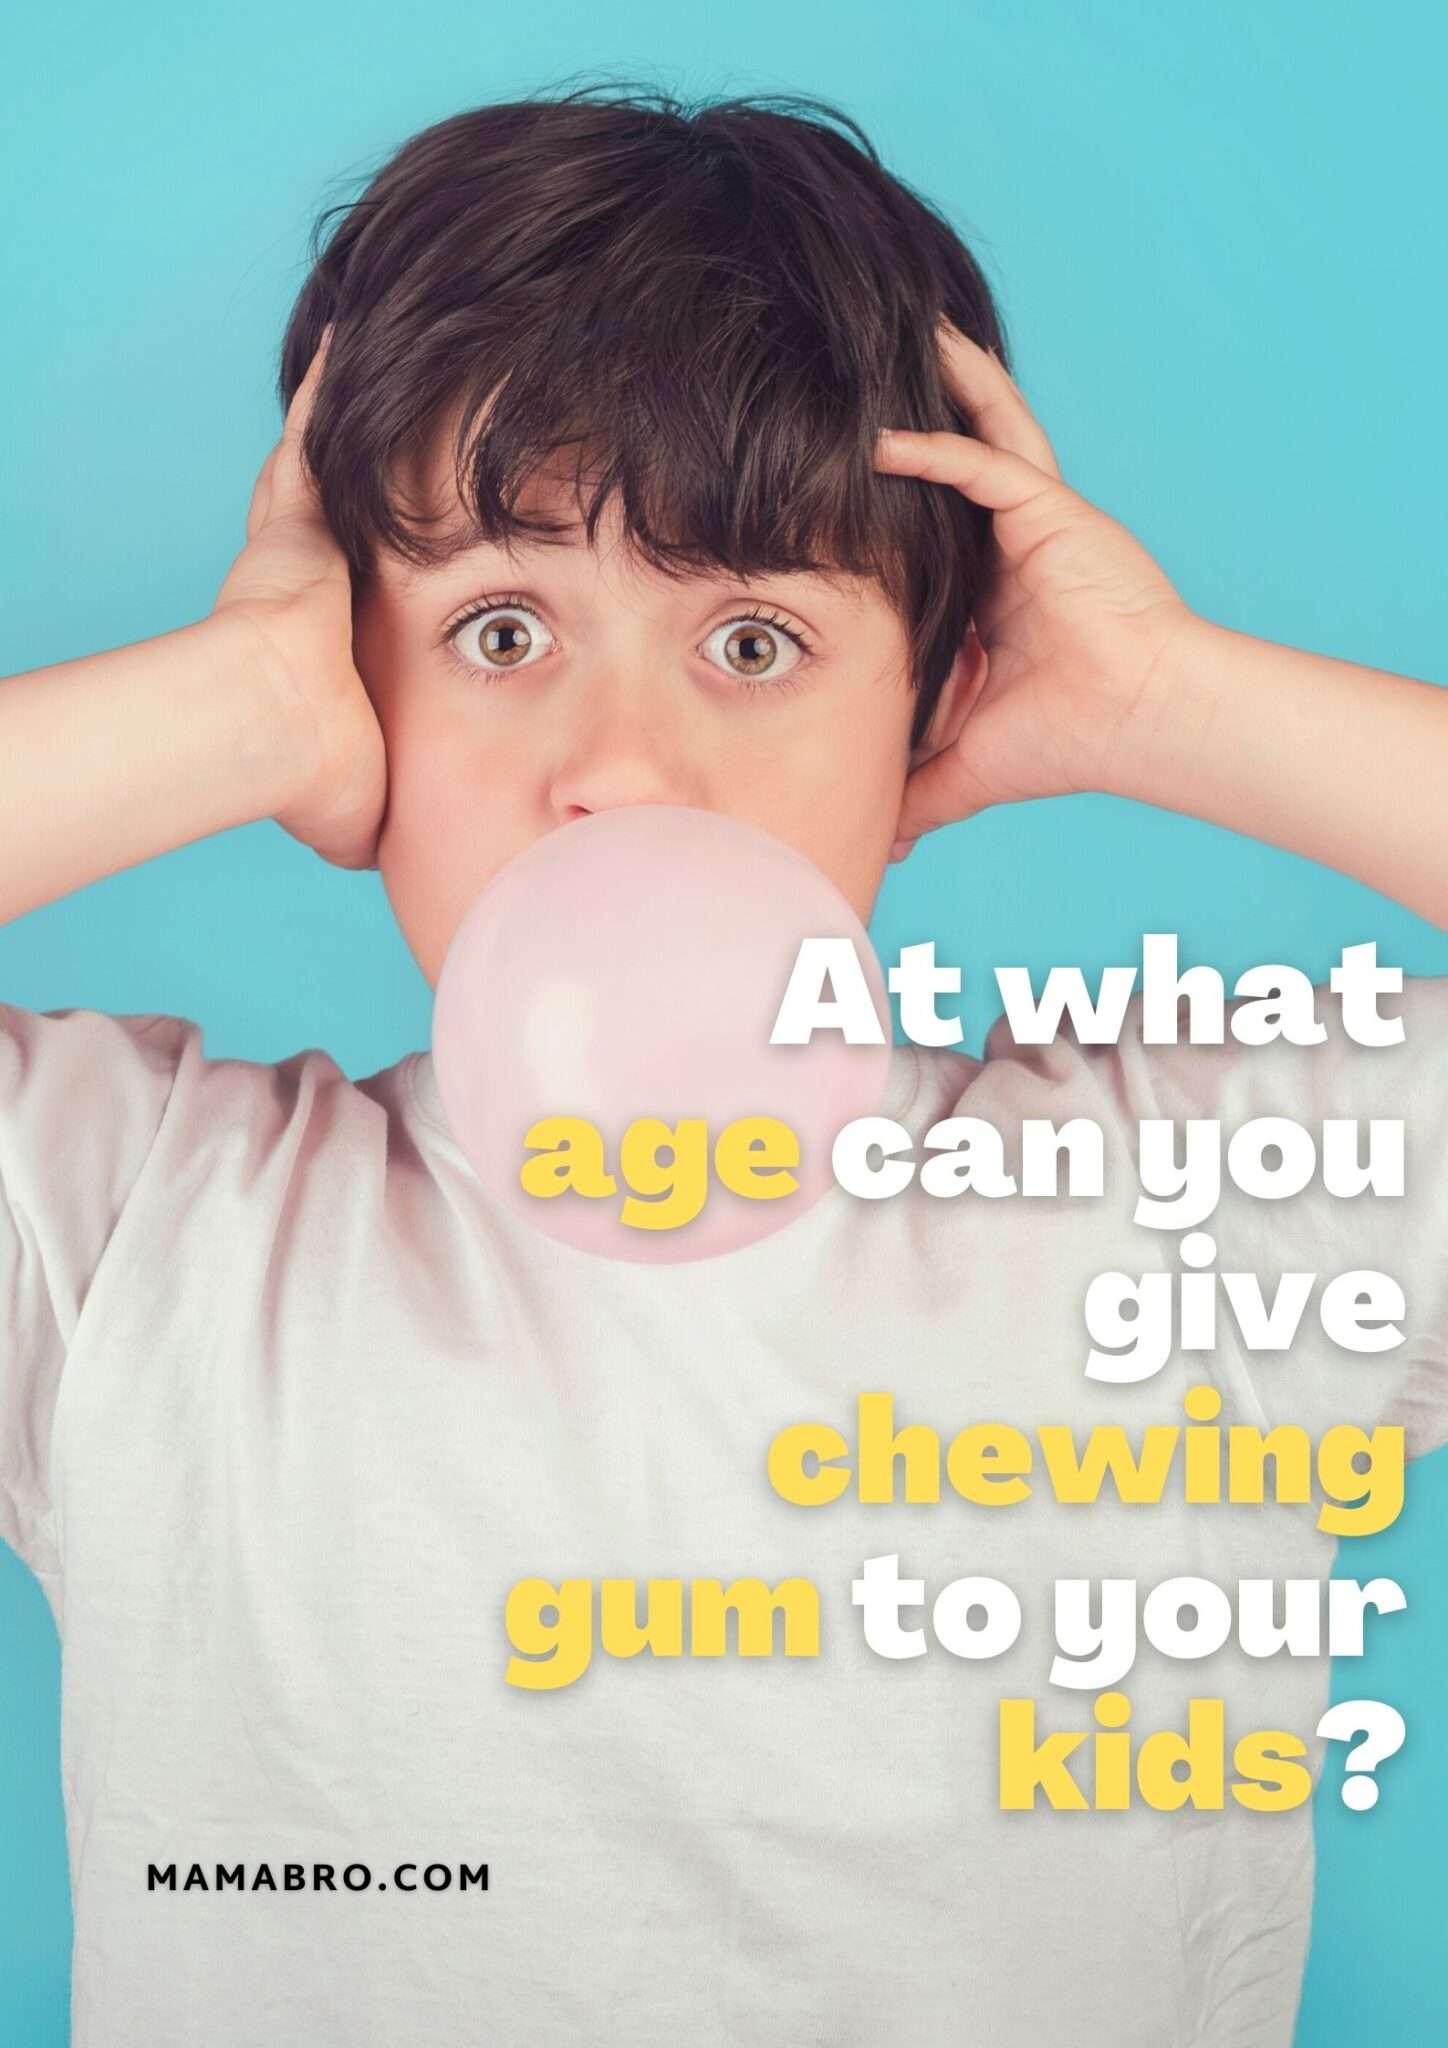 At what age can you give chewing gum to your kids?